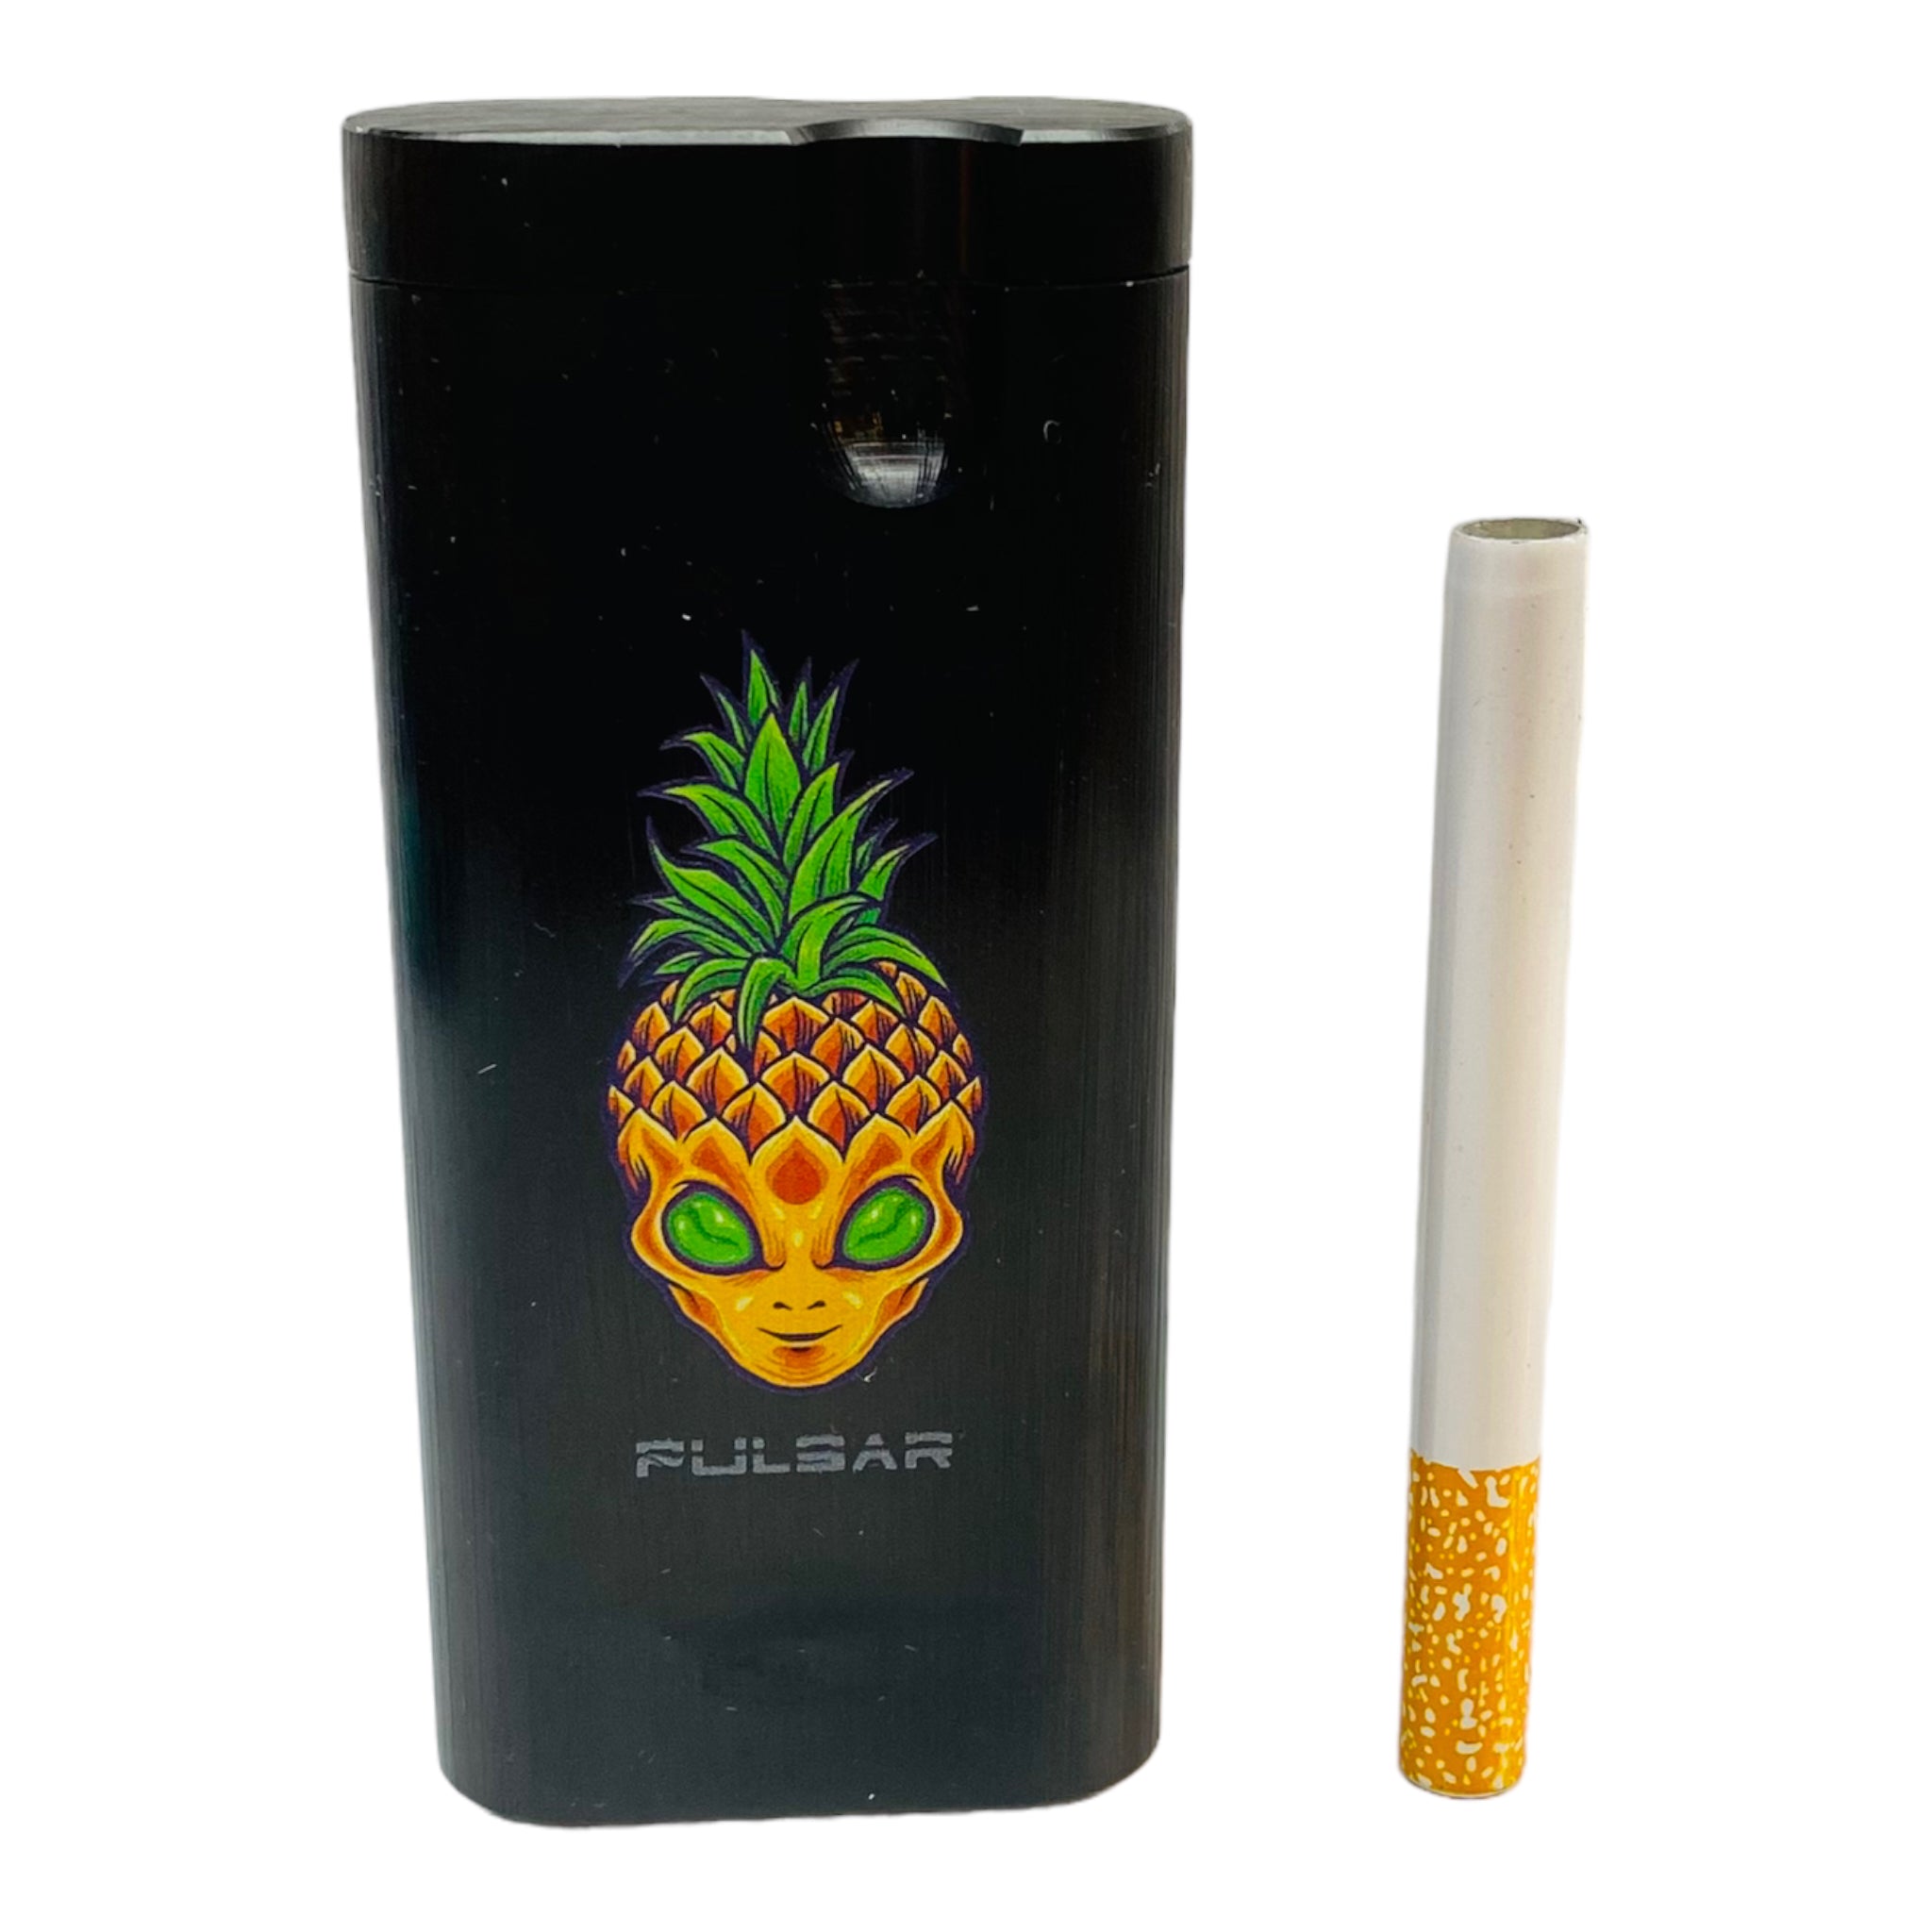 Pulsar - Black Aluminum Dug Out With Pineapple Alien Face